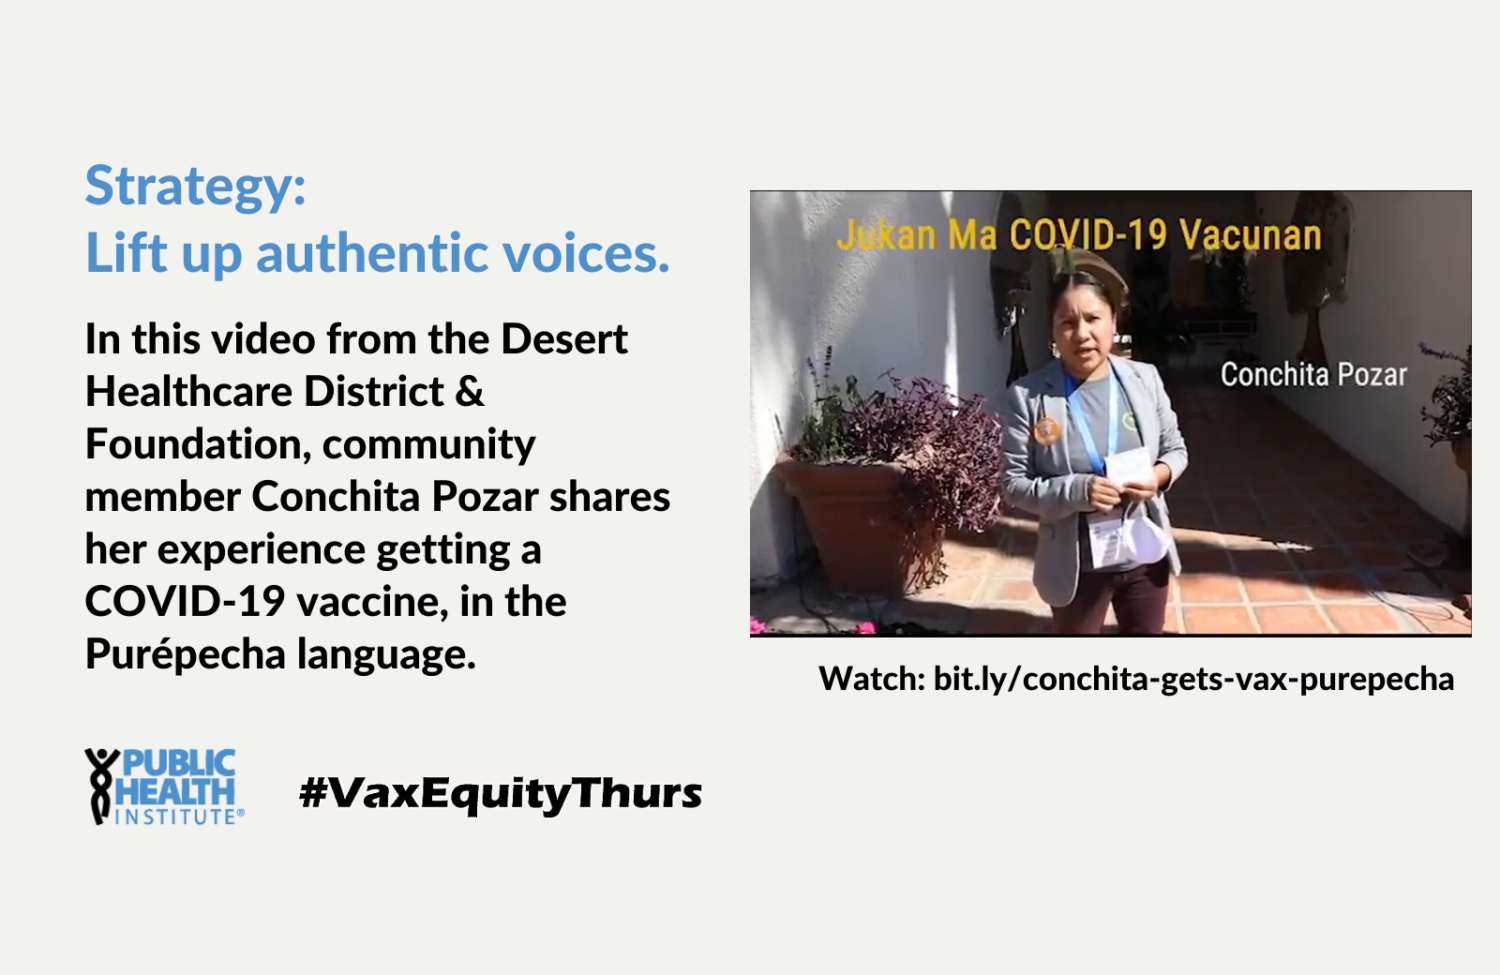 Strategy: Lift up authentic voices. In this video from the Desert Healthcare District & Foundation, community member Conchita Pozar shares her experience getting a COVID-19 vaccine, in the Purépecha language.